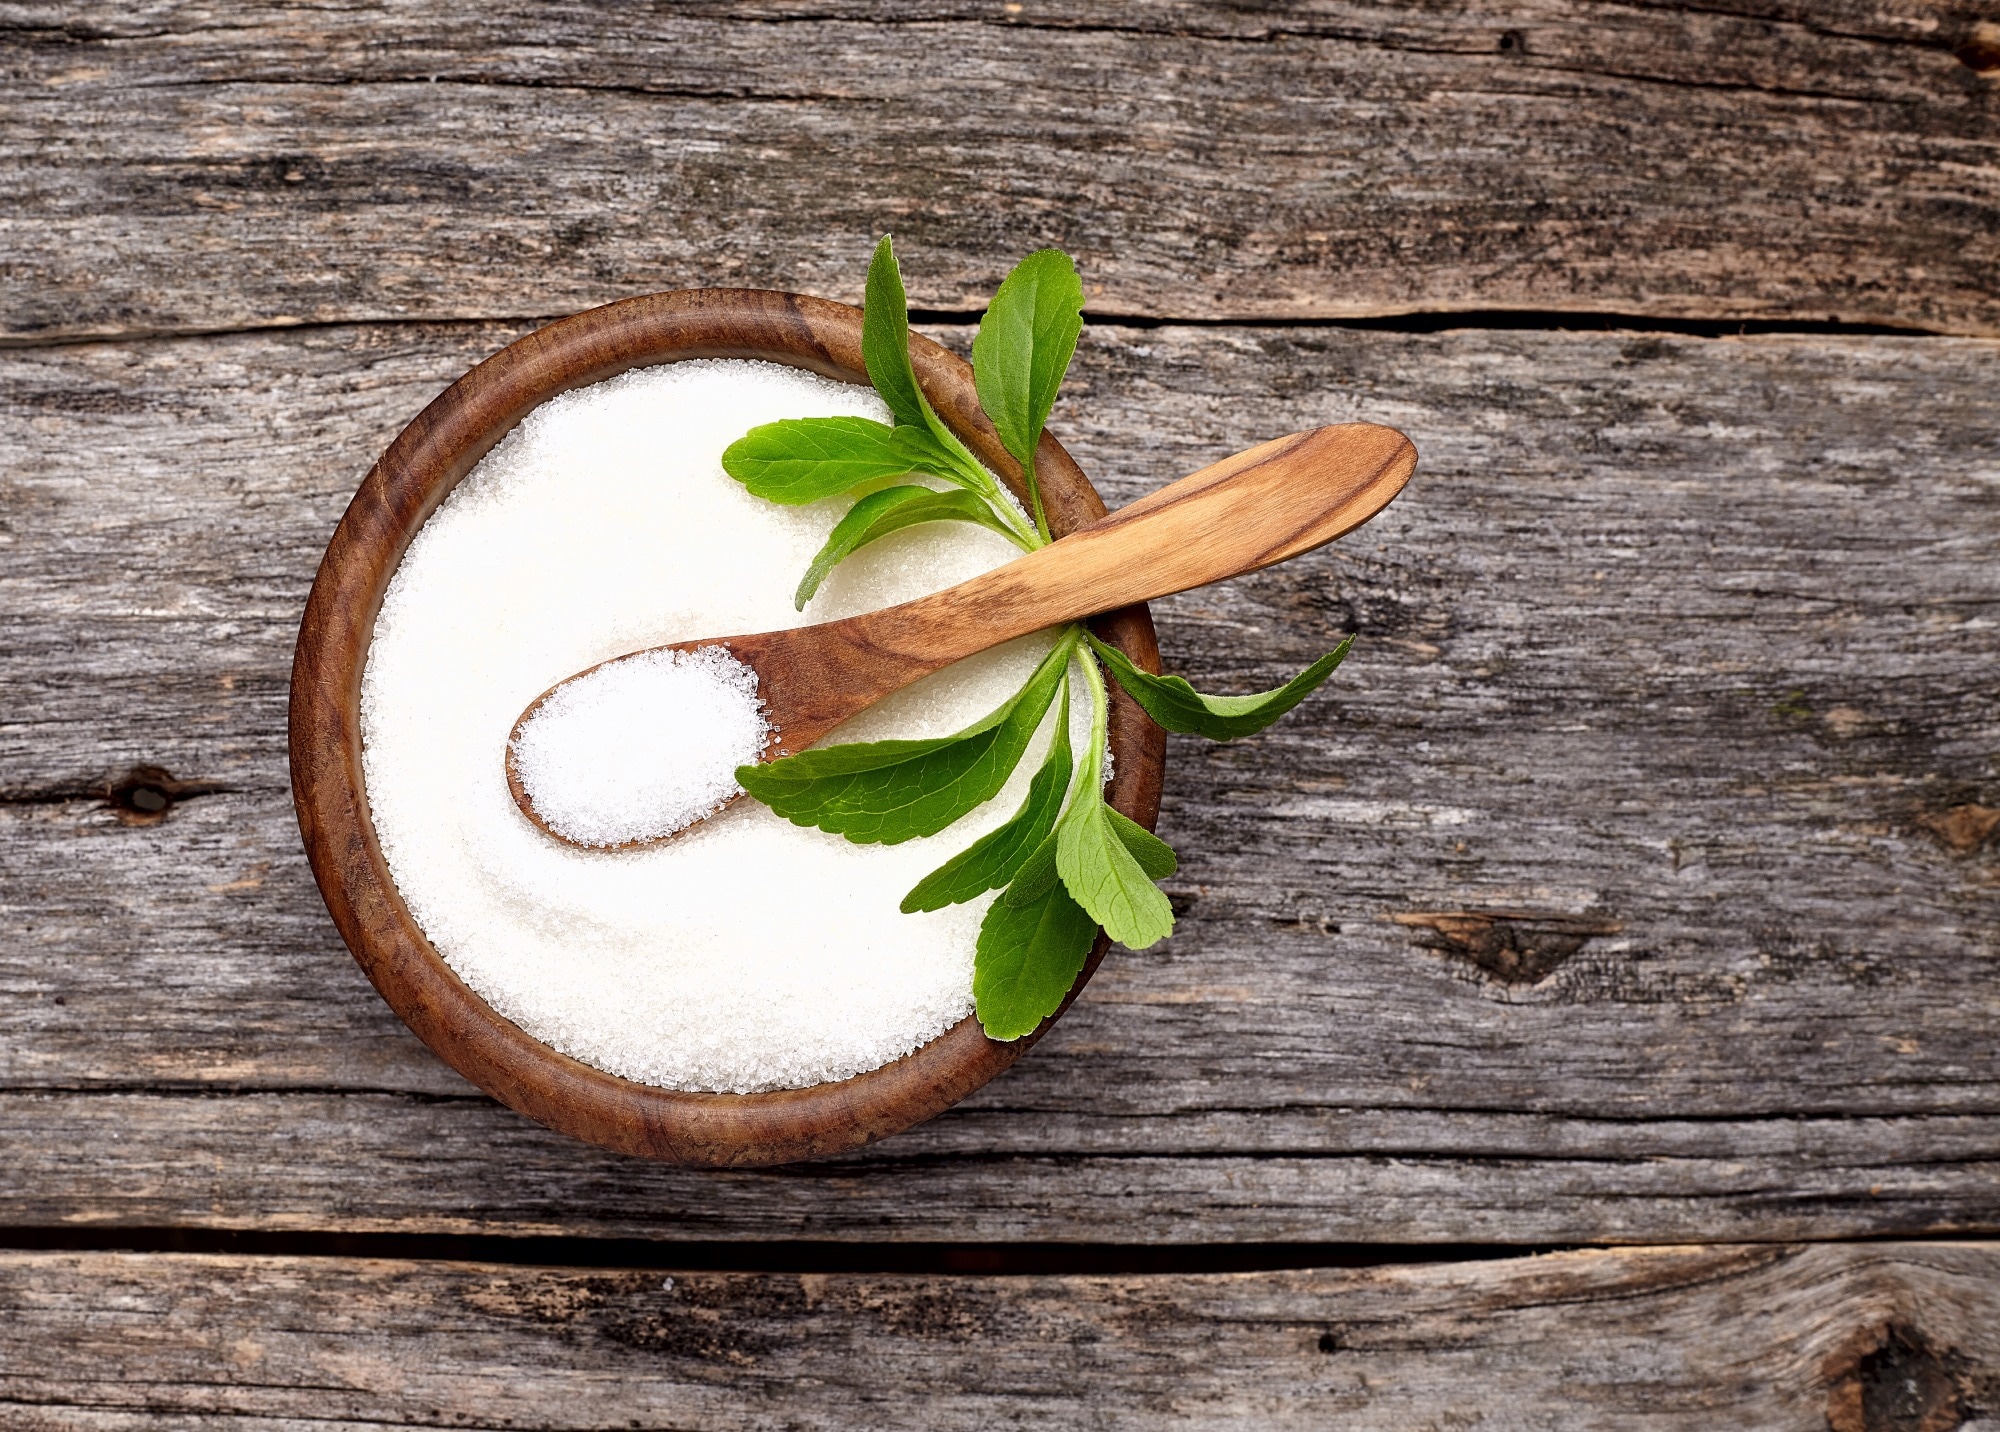 Study: Consumption of the Non-Nutritive Sweetener Stevia for 12 Weeks Does Not Alter the Composition of the Human Gut Microbiota. Image Credit: TatianaMishina/Shutterstock.com